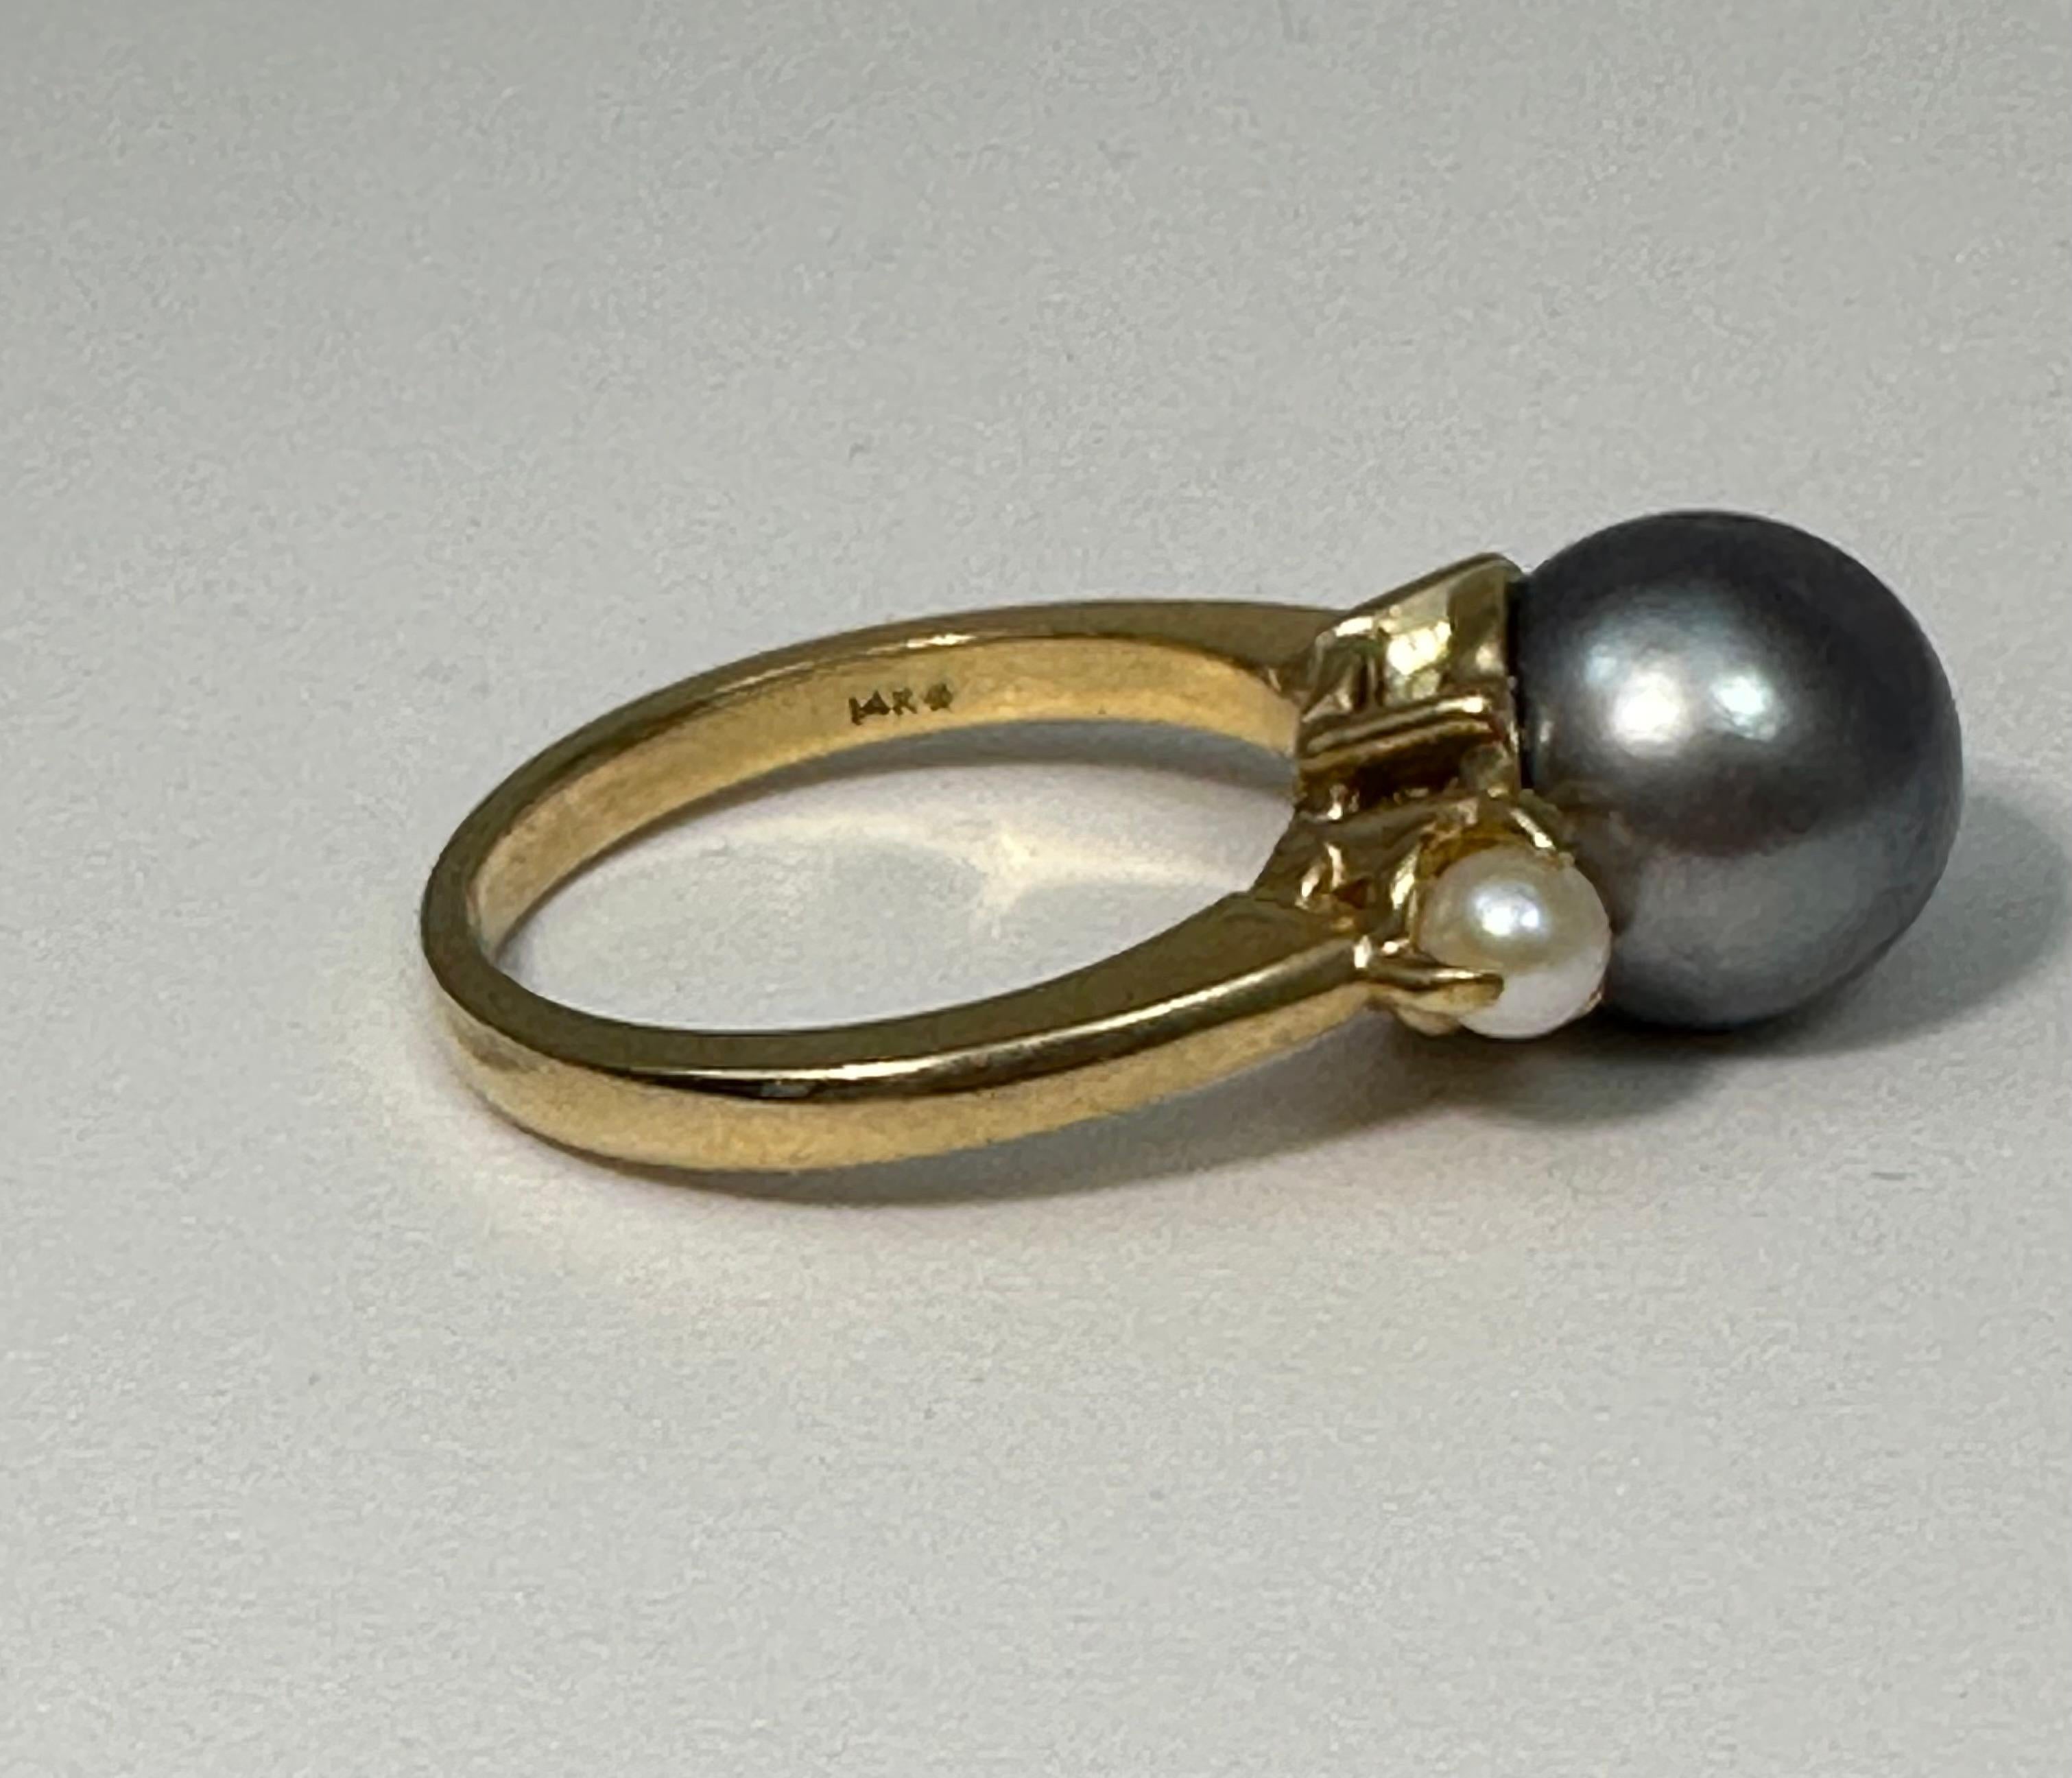 14k Yellow Gold ~ 9.5mm Gray Pearl ~ 2 ~ 4mm Side White Pearls ~ Ring ~ Size 6

Pearls are dainty, pale, shiny, round, and precious objects that effortlessly steal our interest. Since ancient times, pearls linger in our imagination and beliefs. To